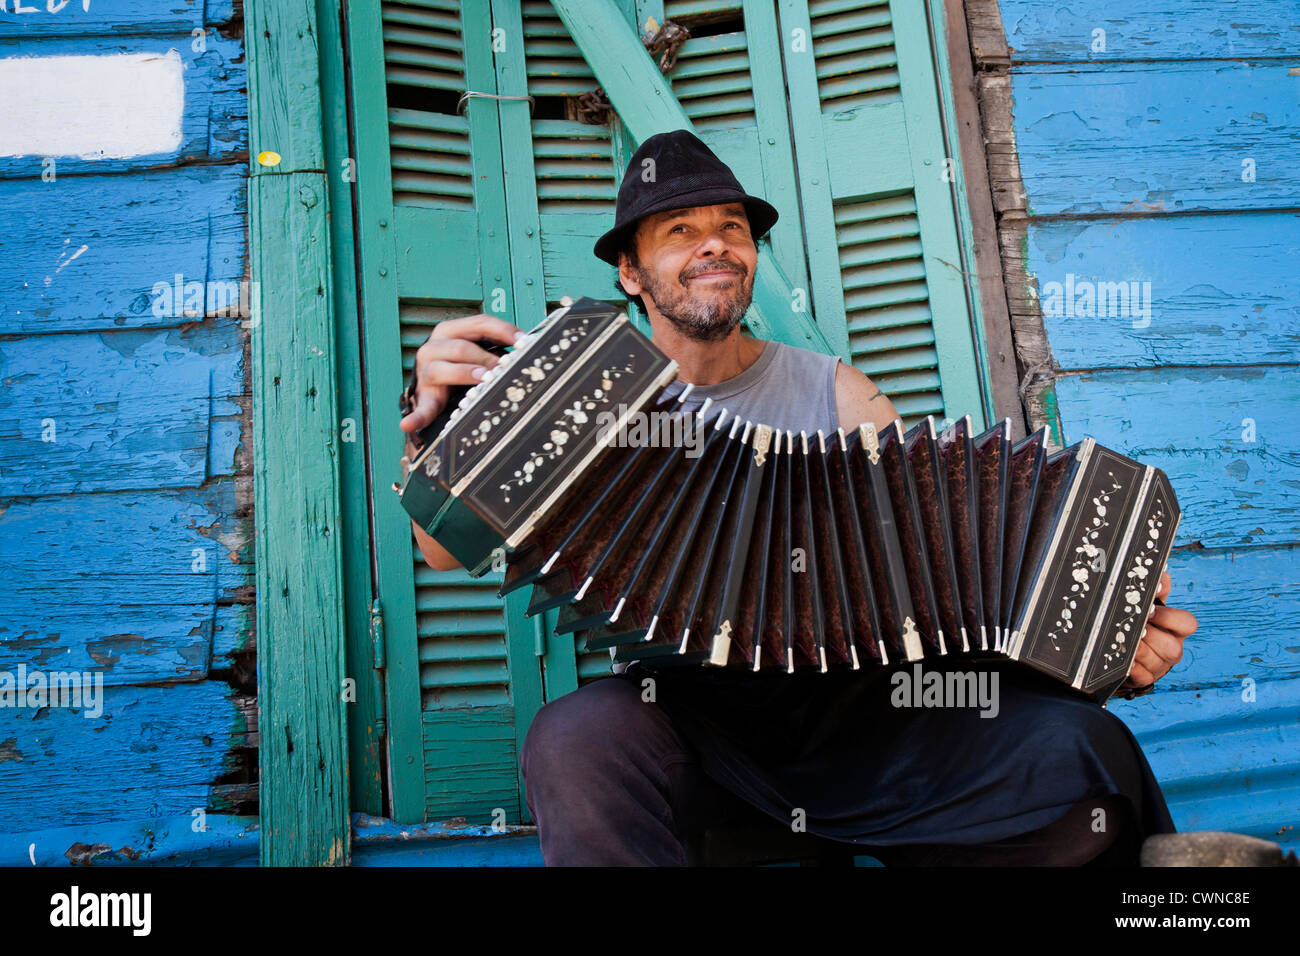 Musician playing the bandeon at Caminito area in La boca. Buenos Aires, Argentina Stock Photo